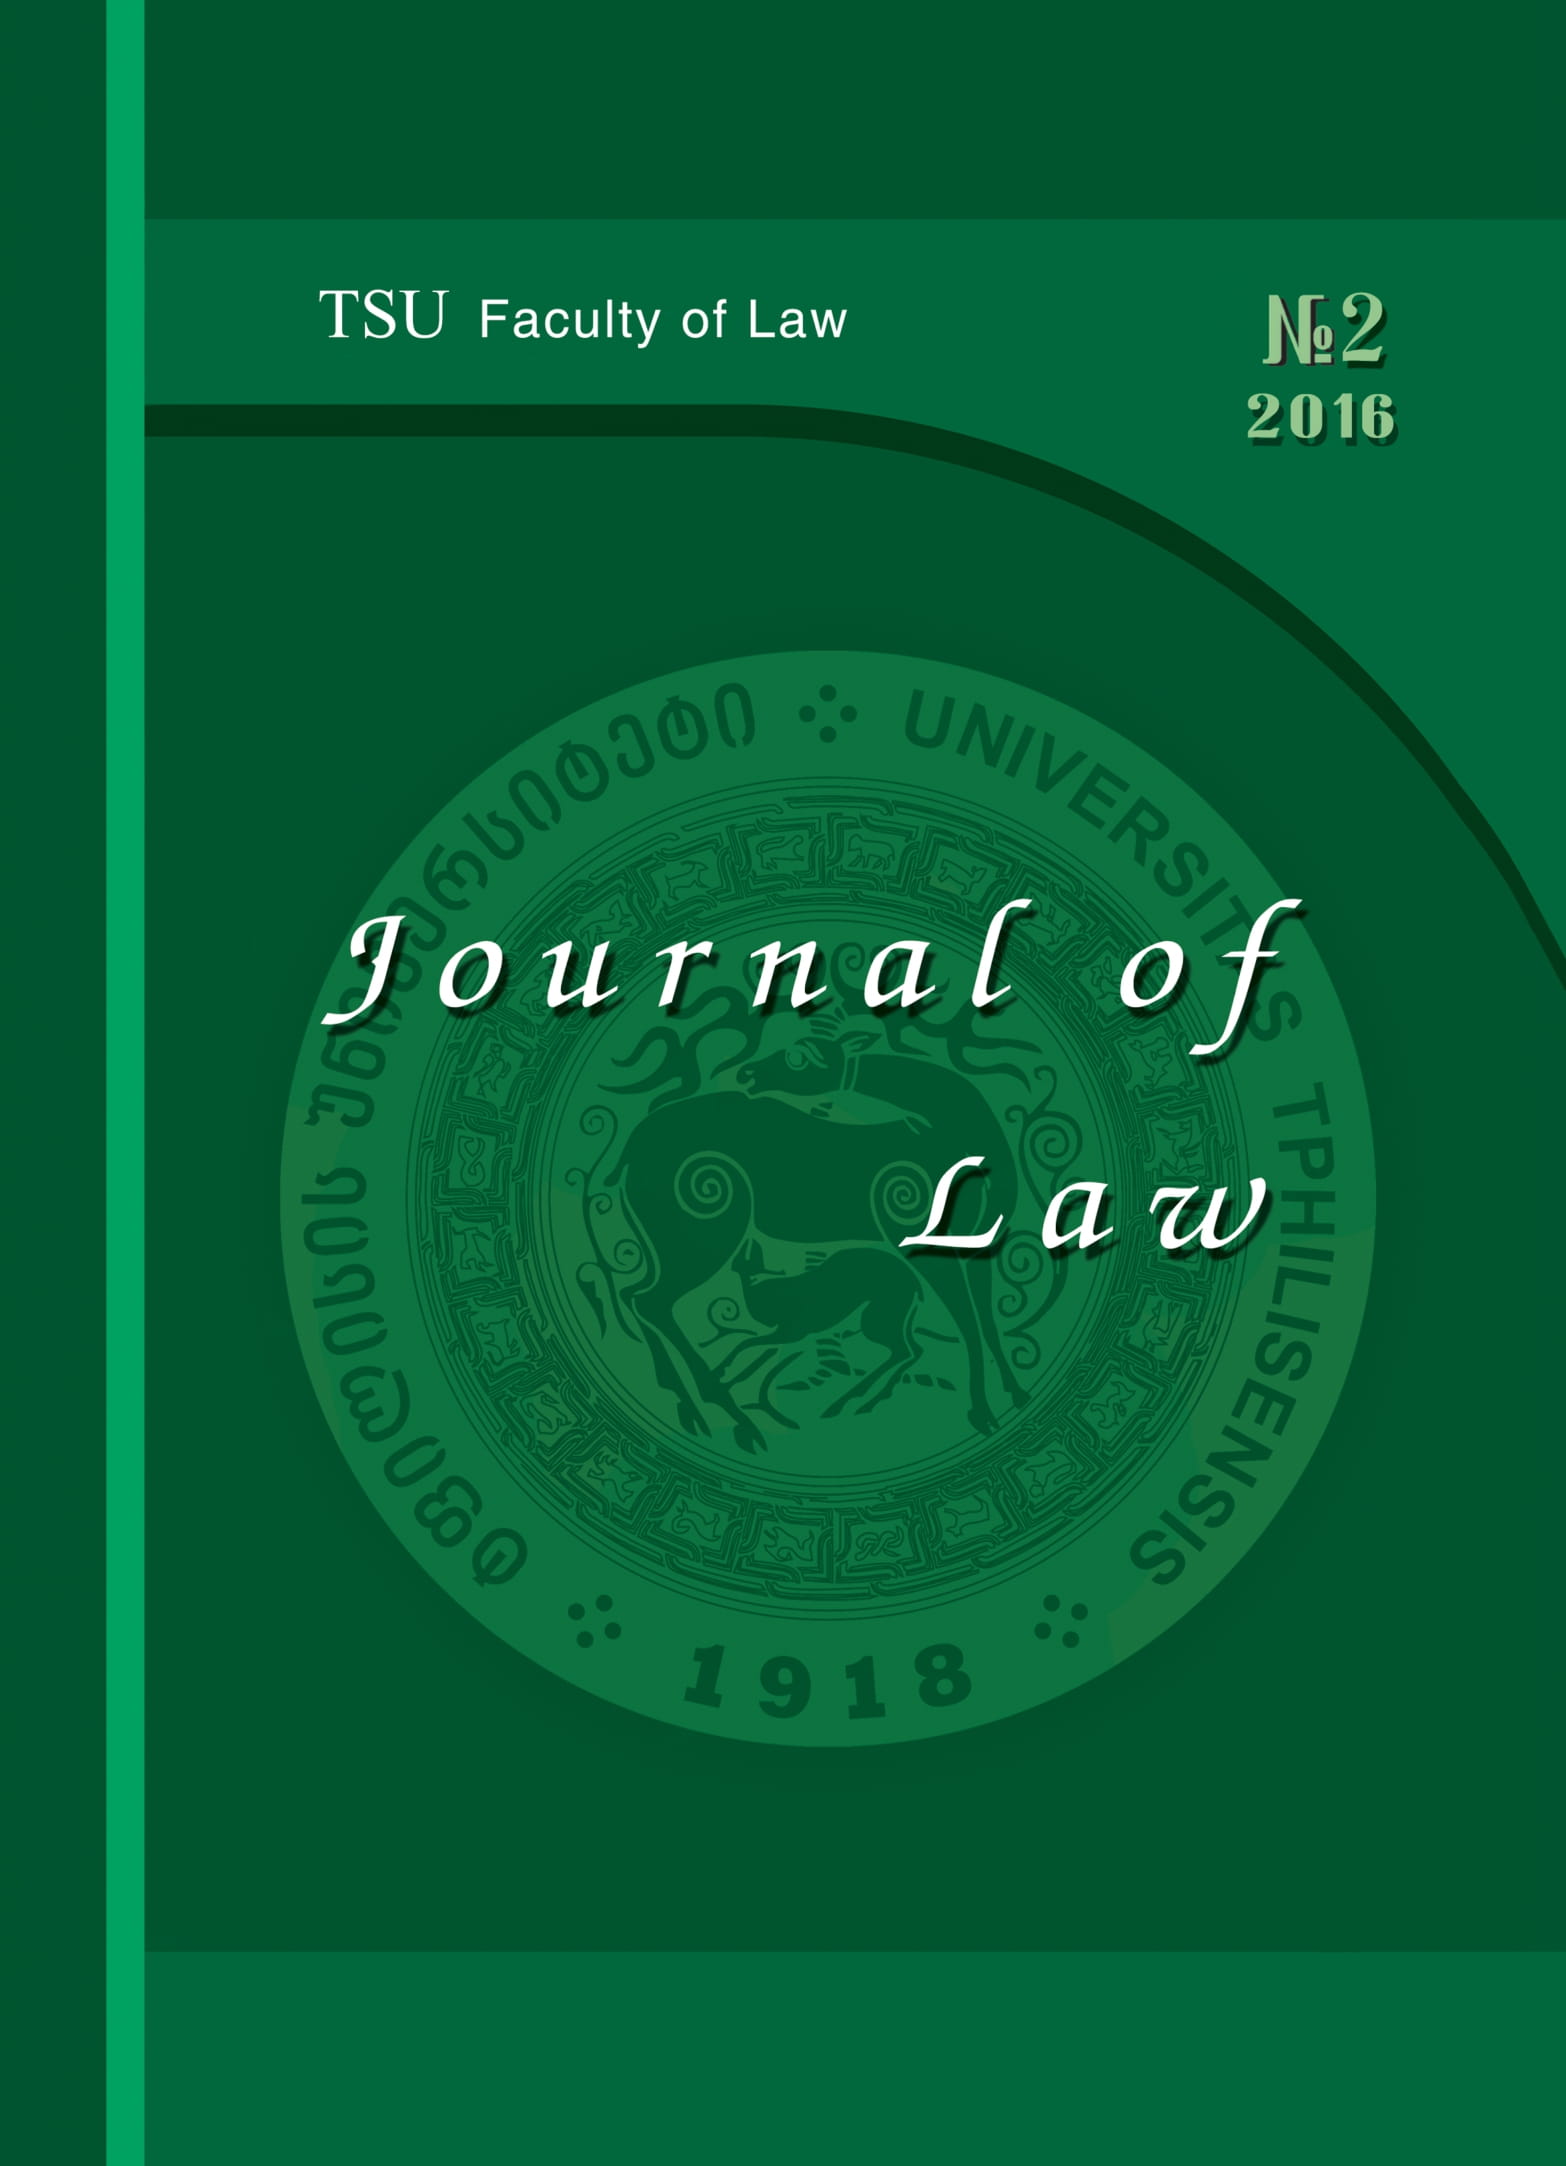 					View No. 2 (2016): Journal of Law
				